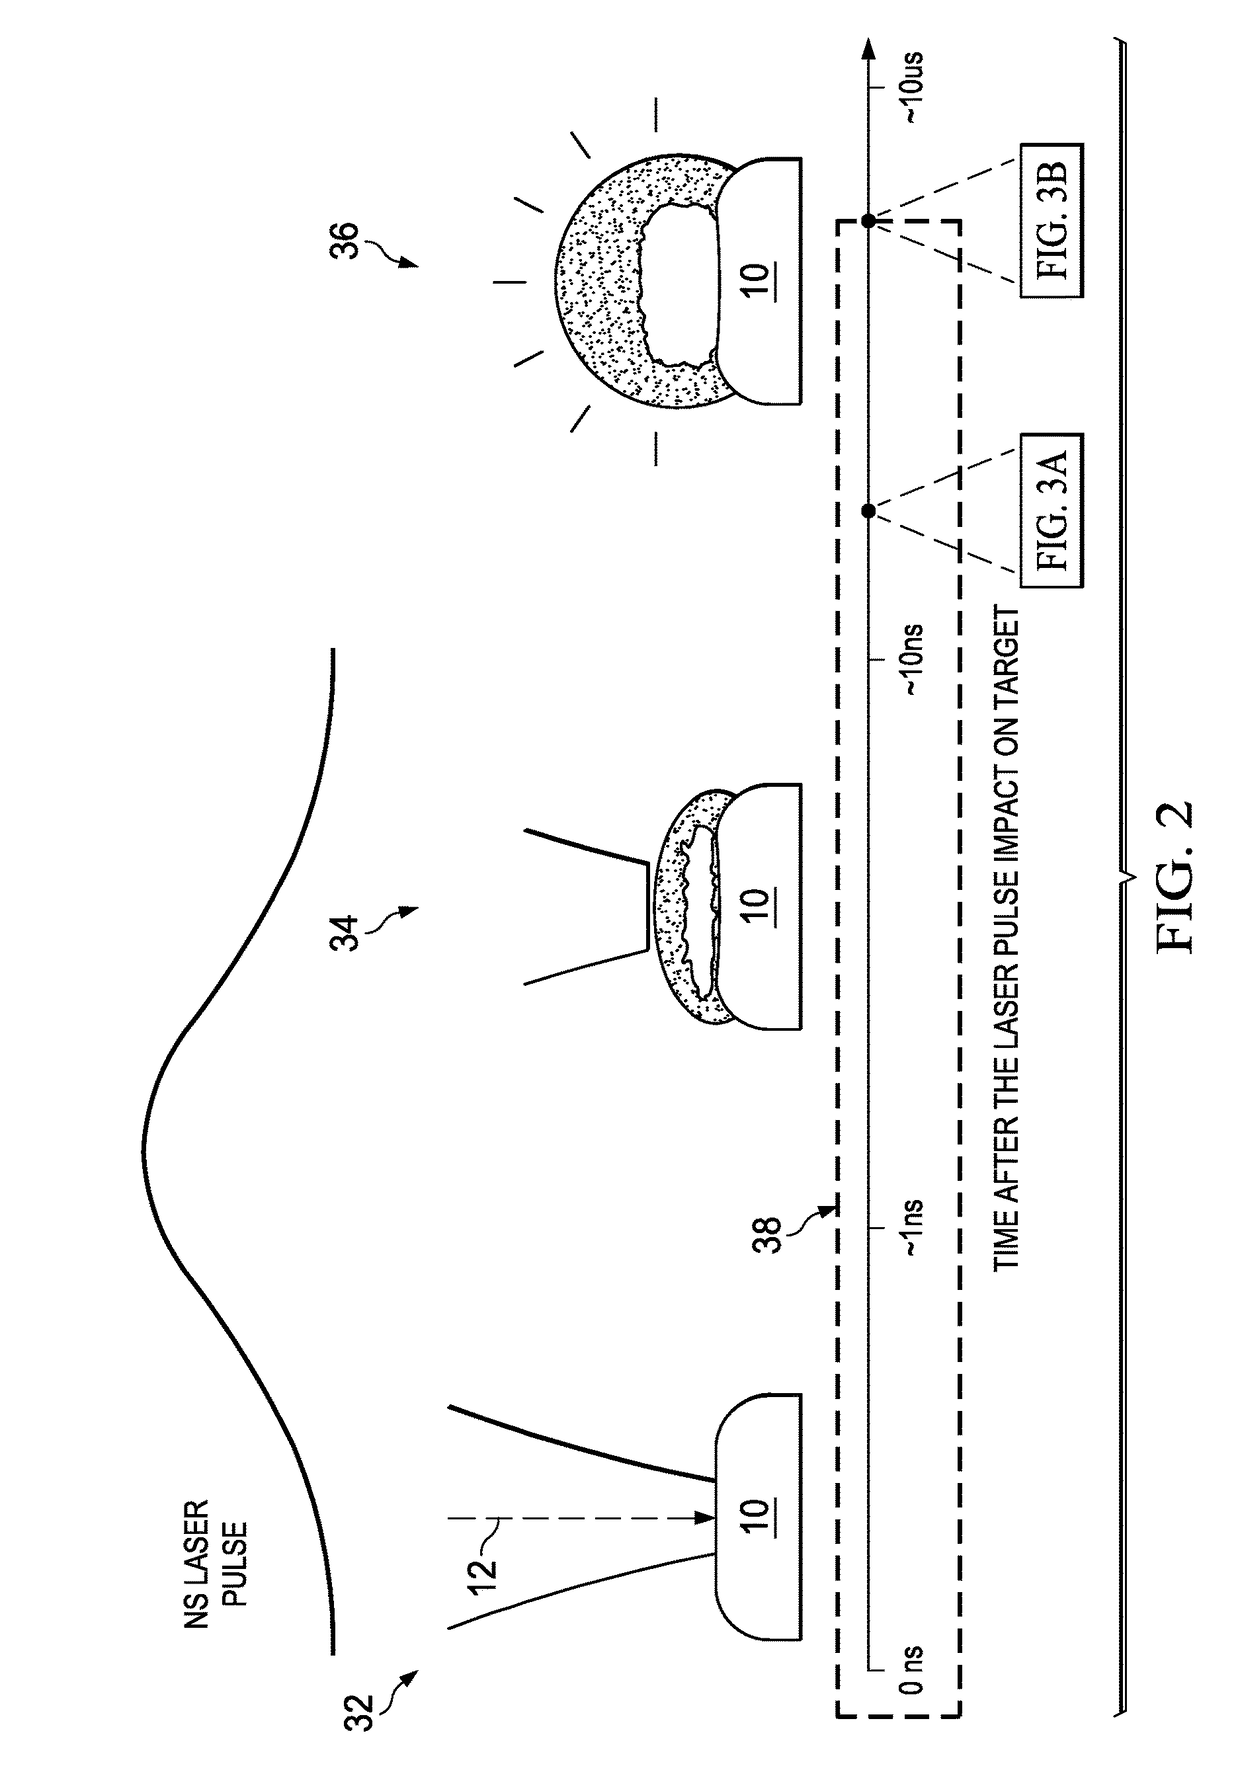 Method for elemental analysis of a snack food product in a dynamic production line